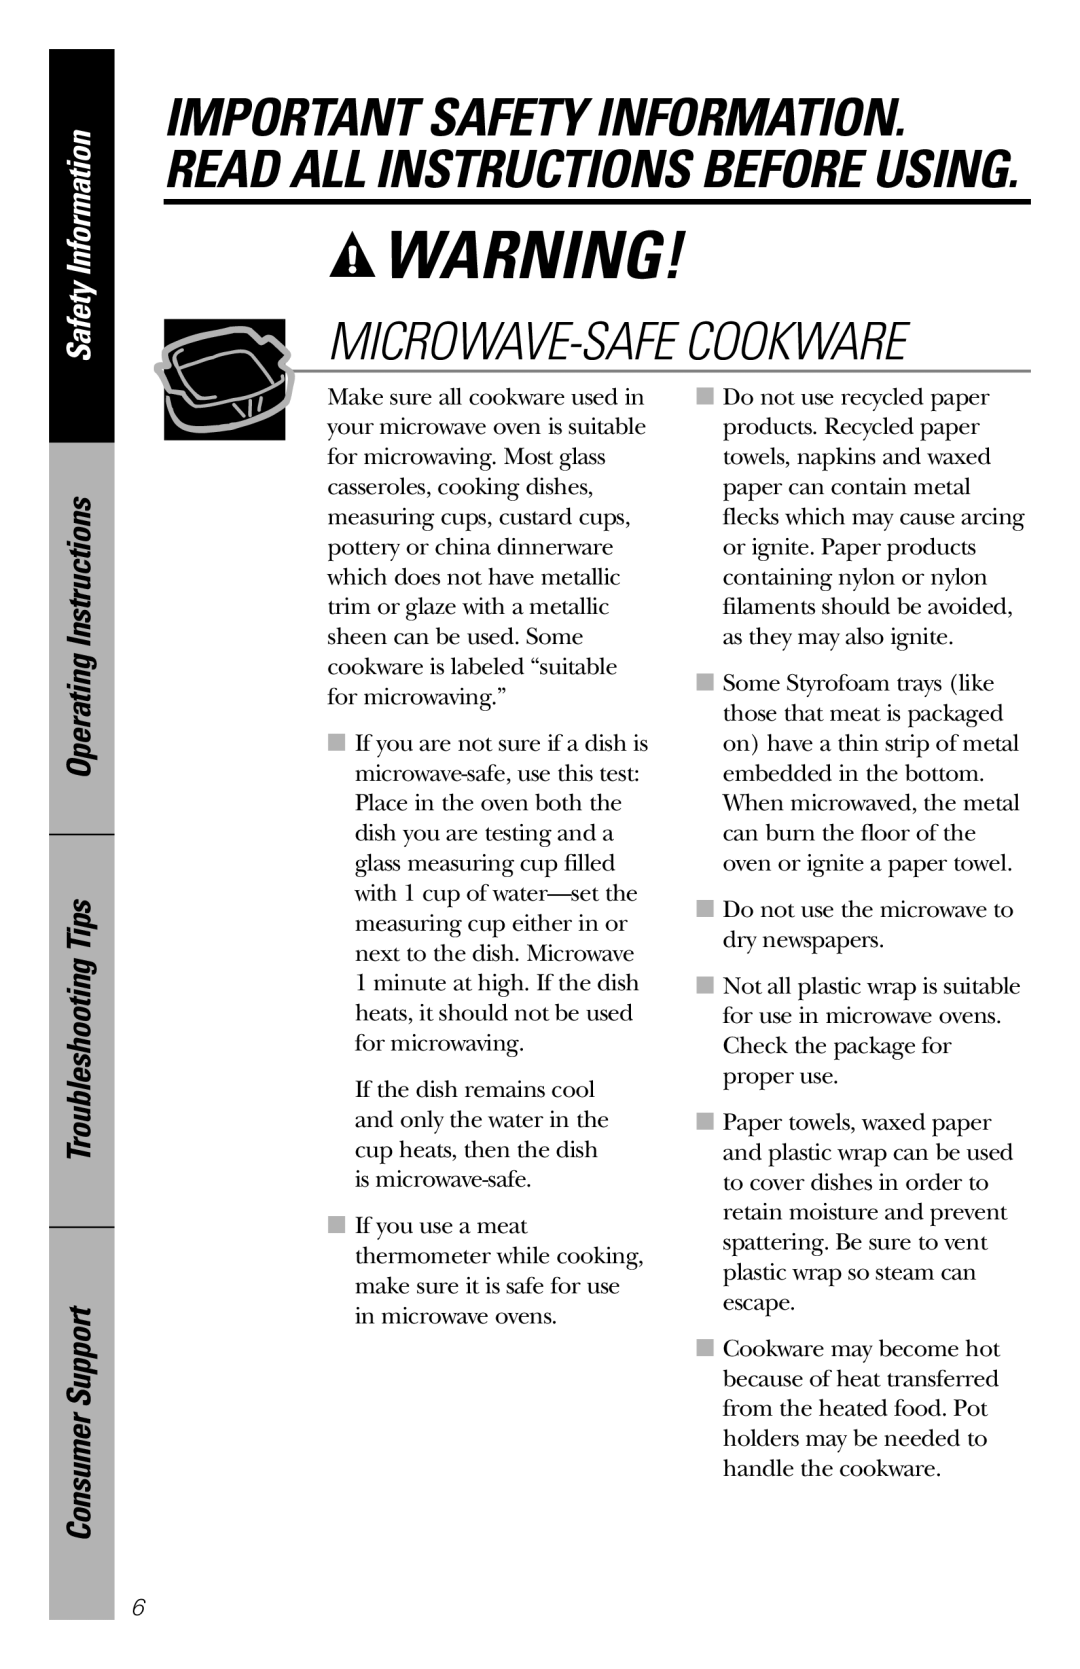 GE JES1039 Microwave-Safecookware, Safety Information, Operating Instructions Troubleshooting Tips, Consumer Support 